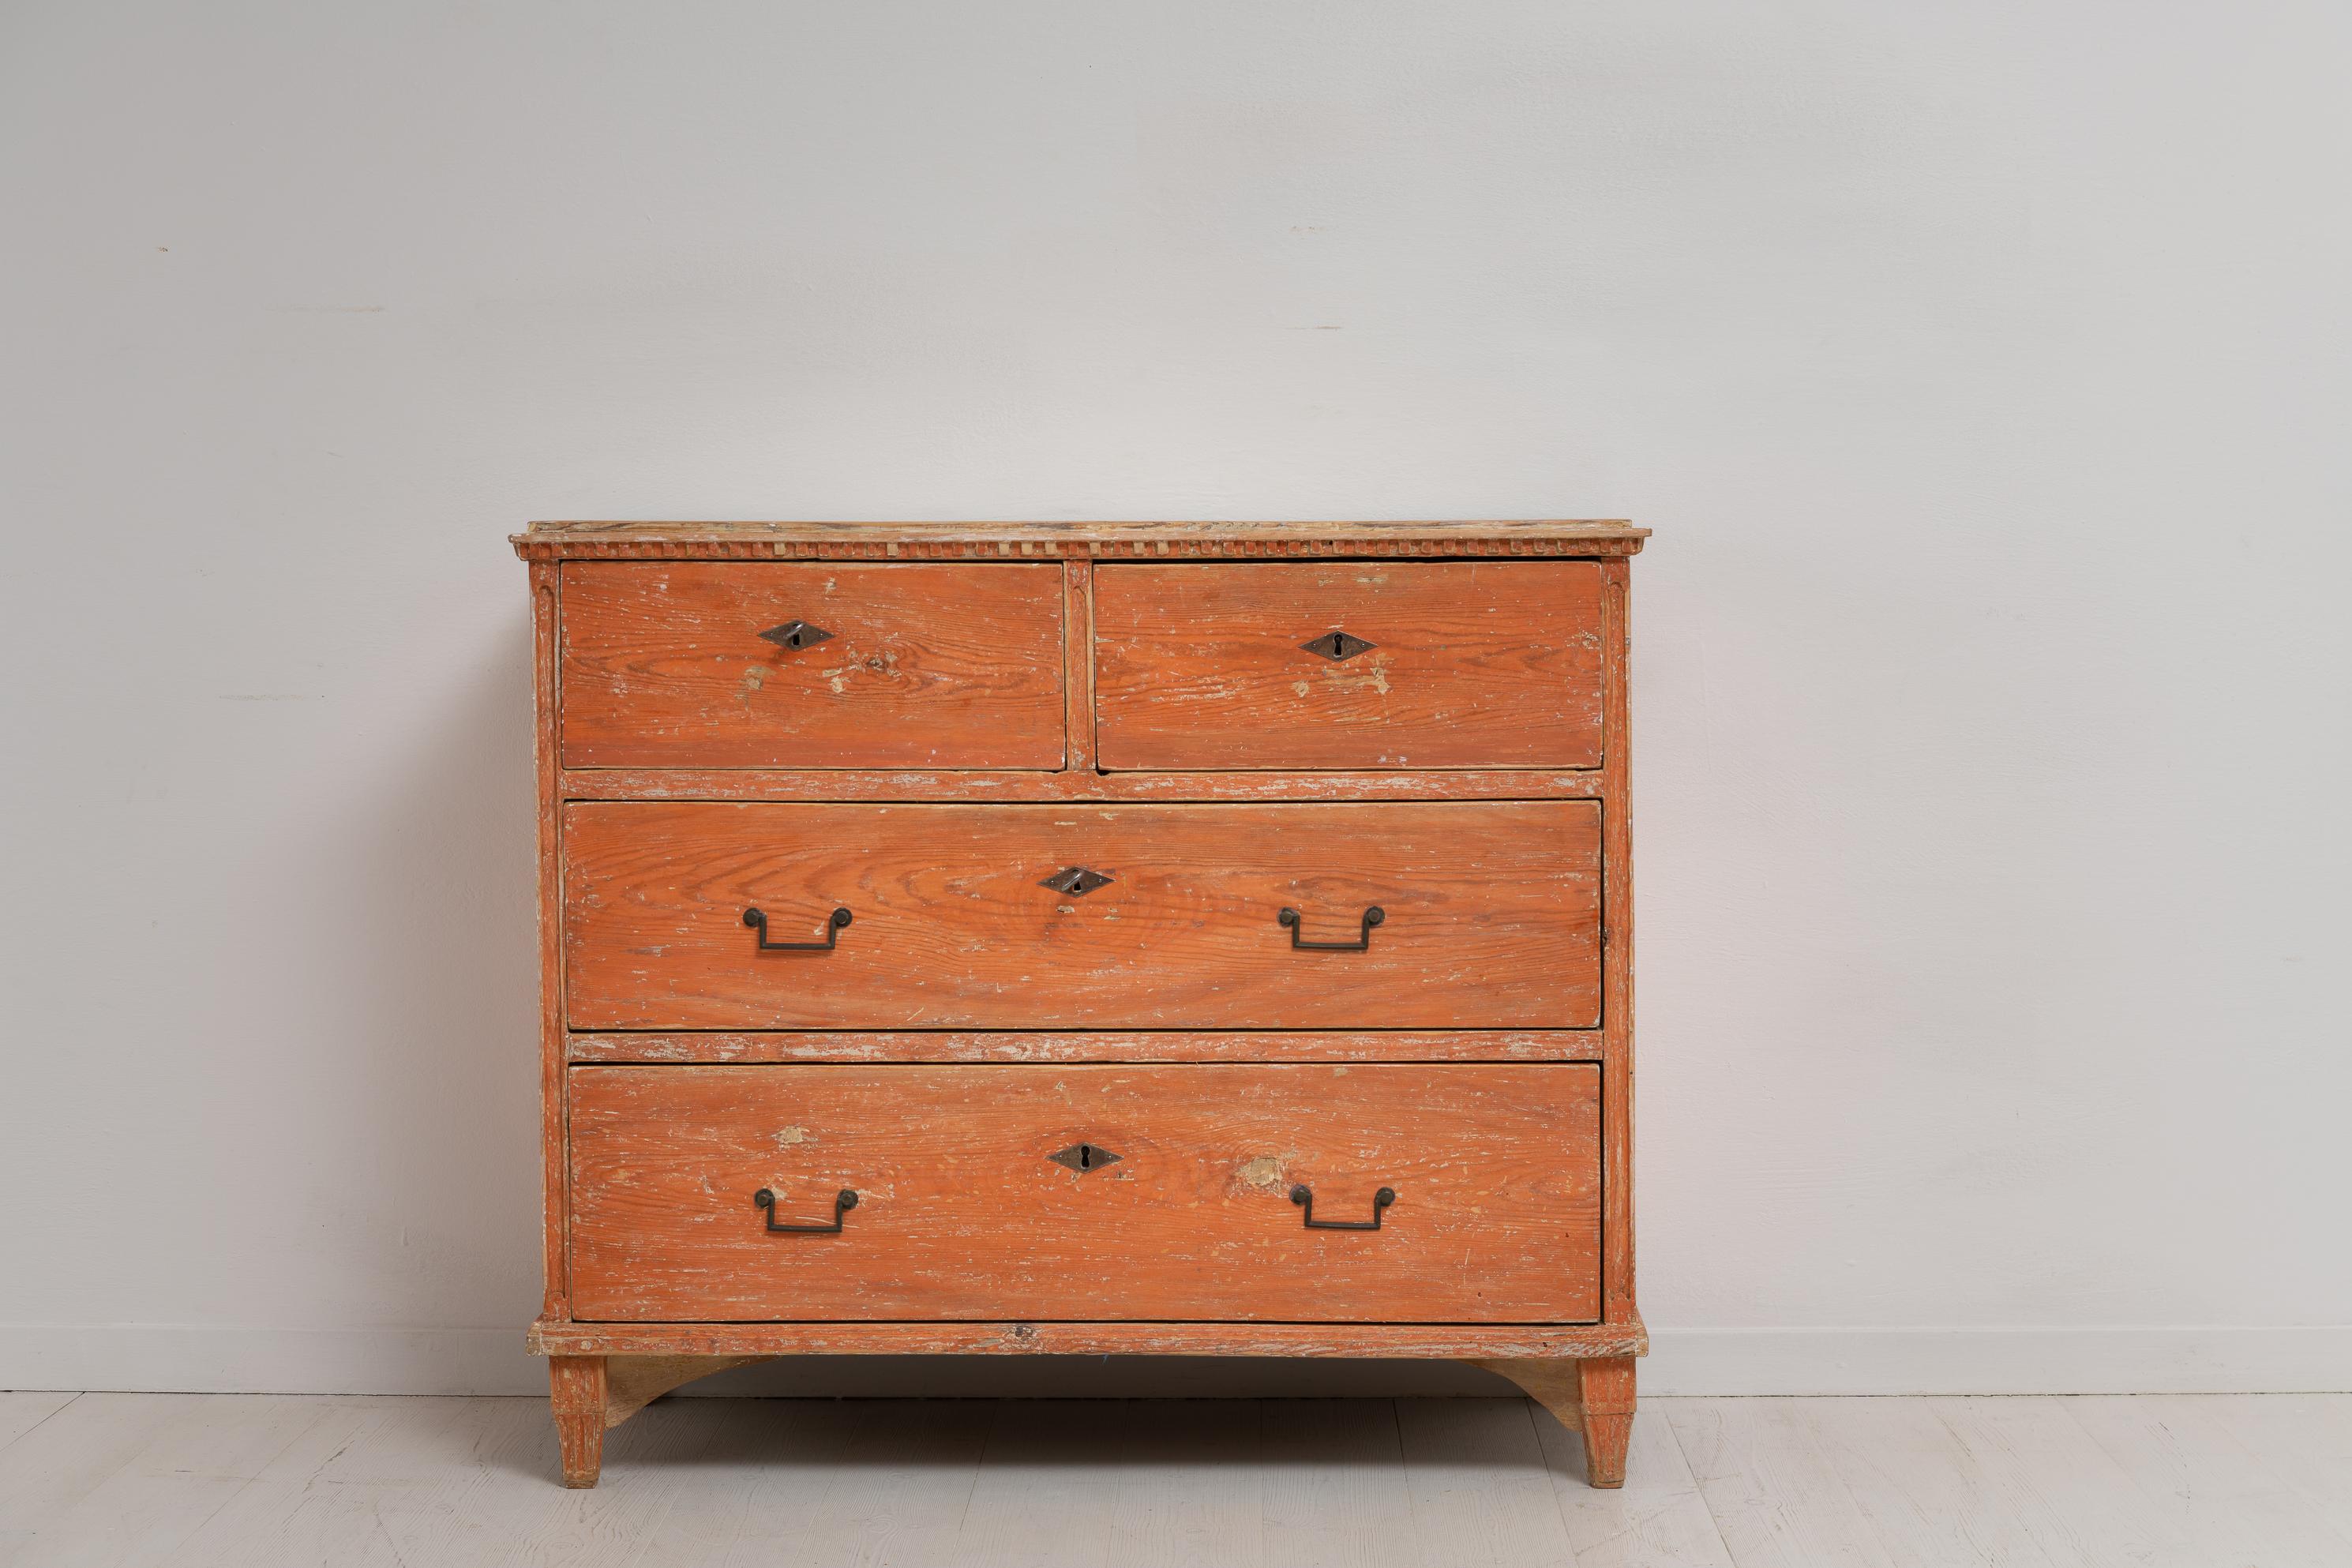 Hand-Crafted Late 18th Century Swedish Gustavian Neoclassical Chest of Drawers